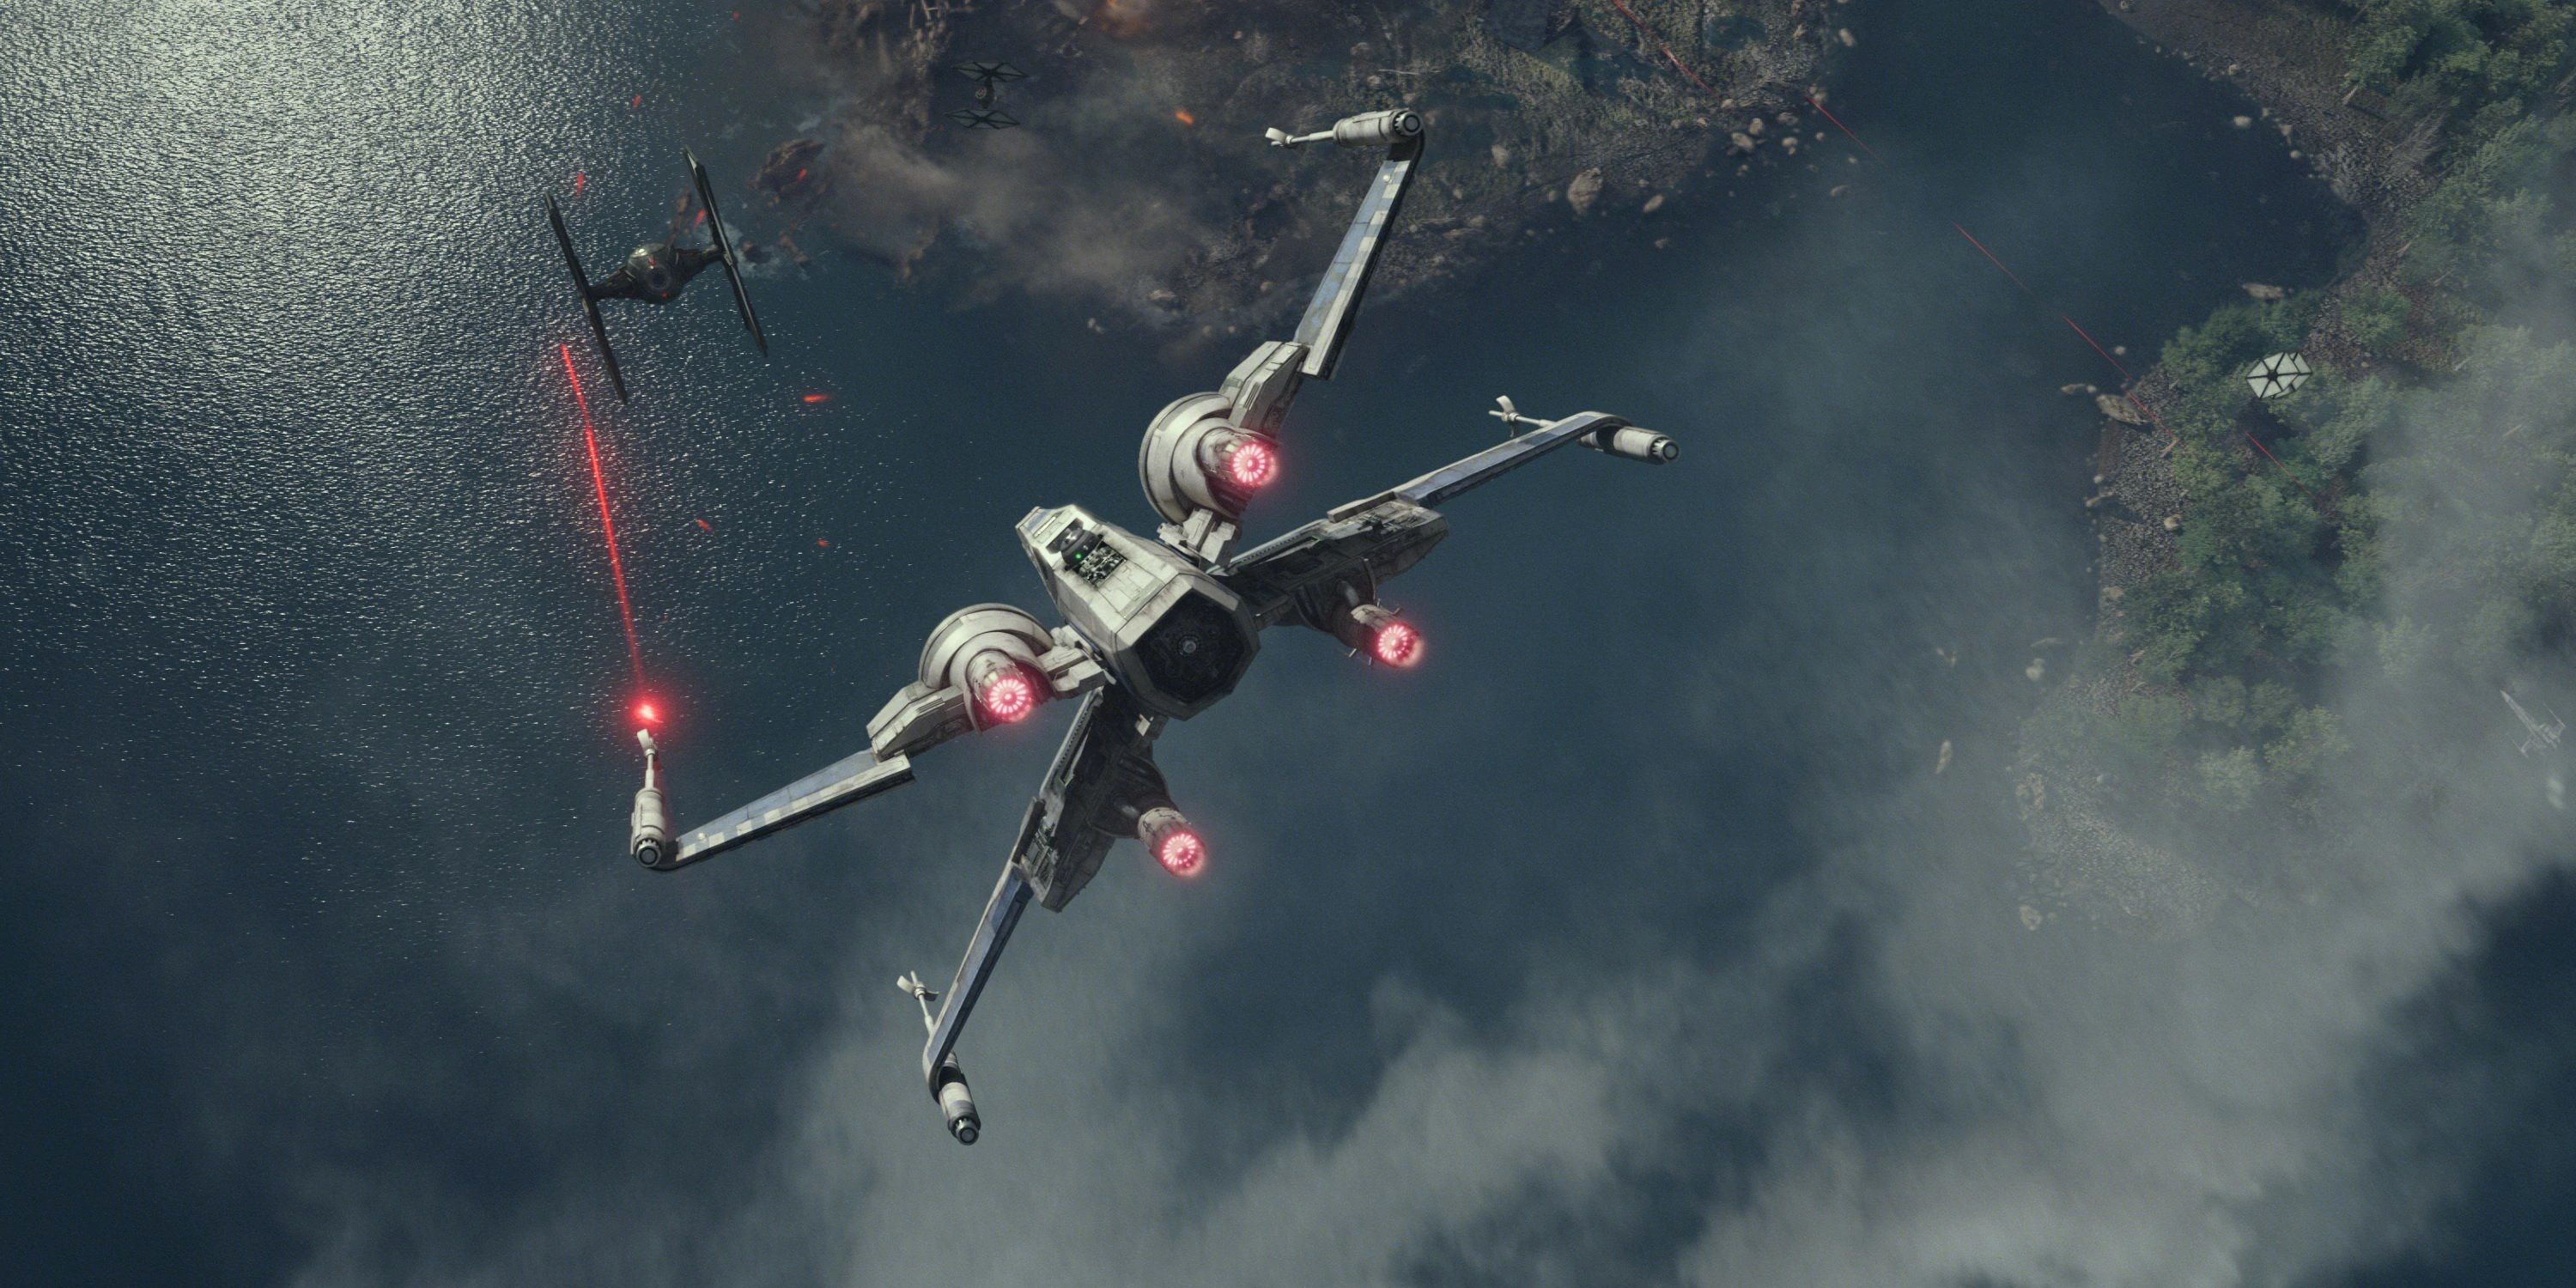 X-wing dogfight in Star Wars The Force Awakens